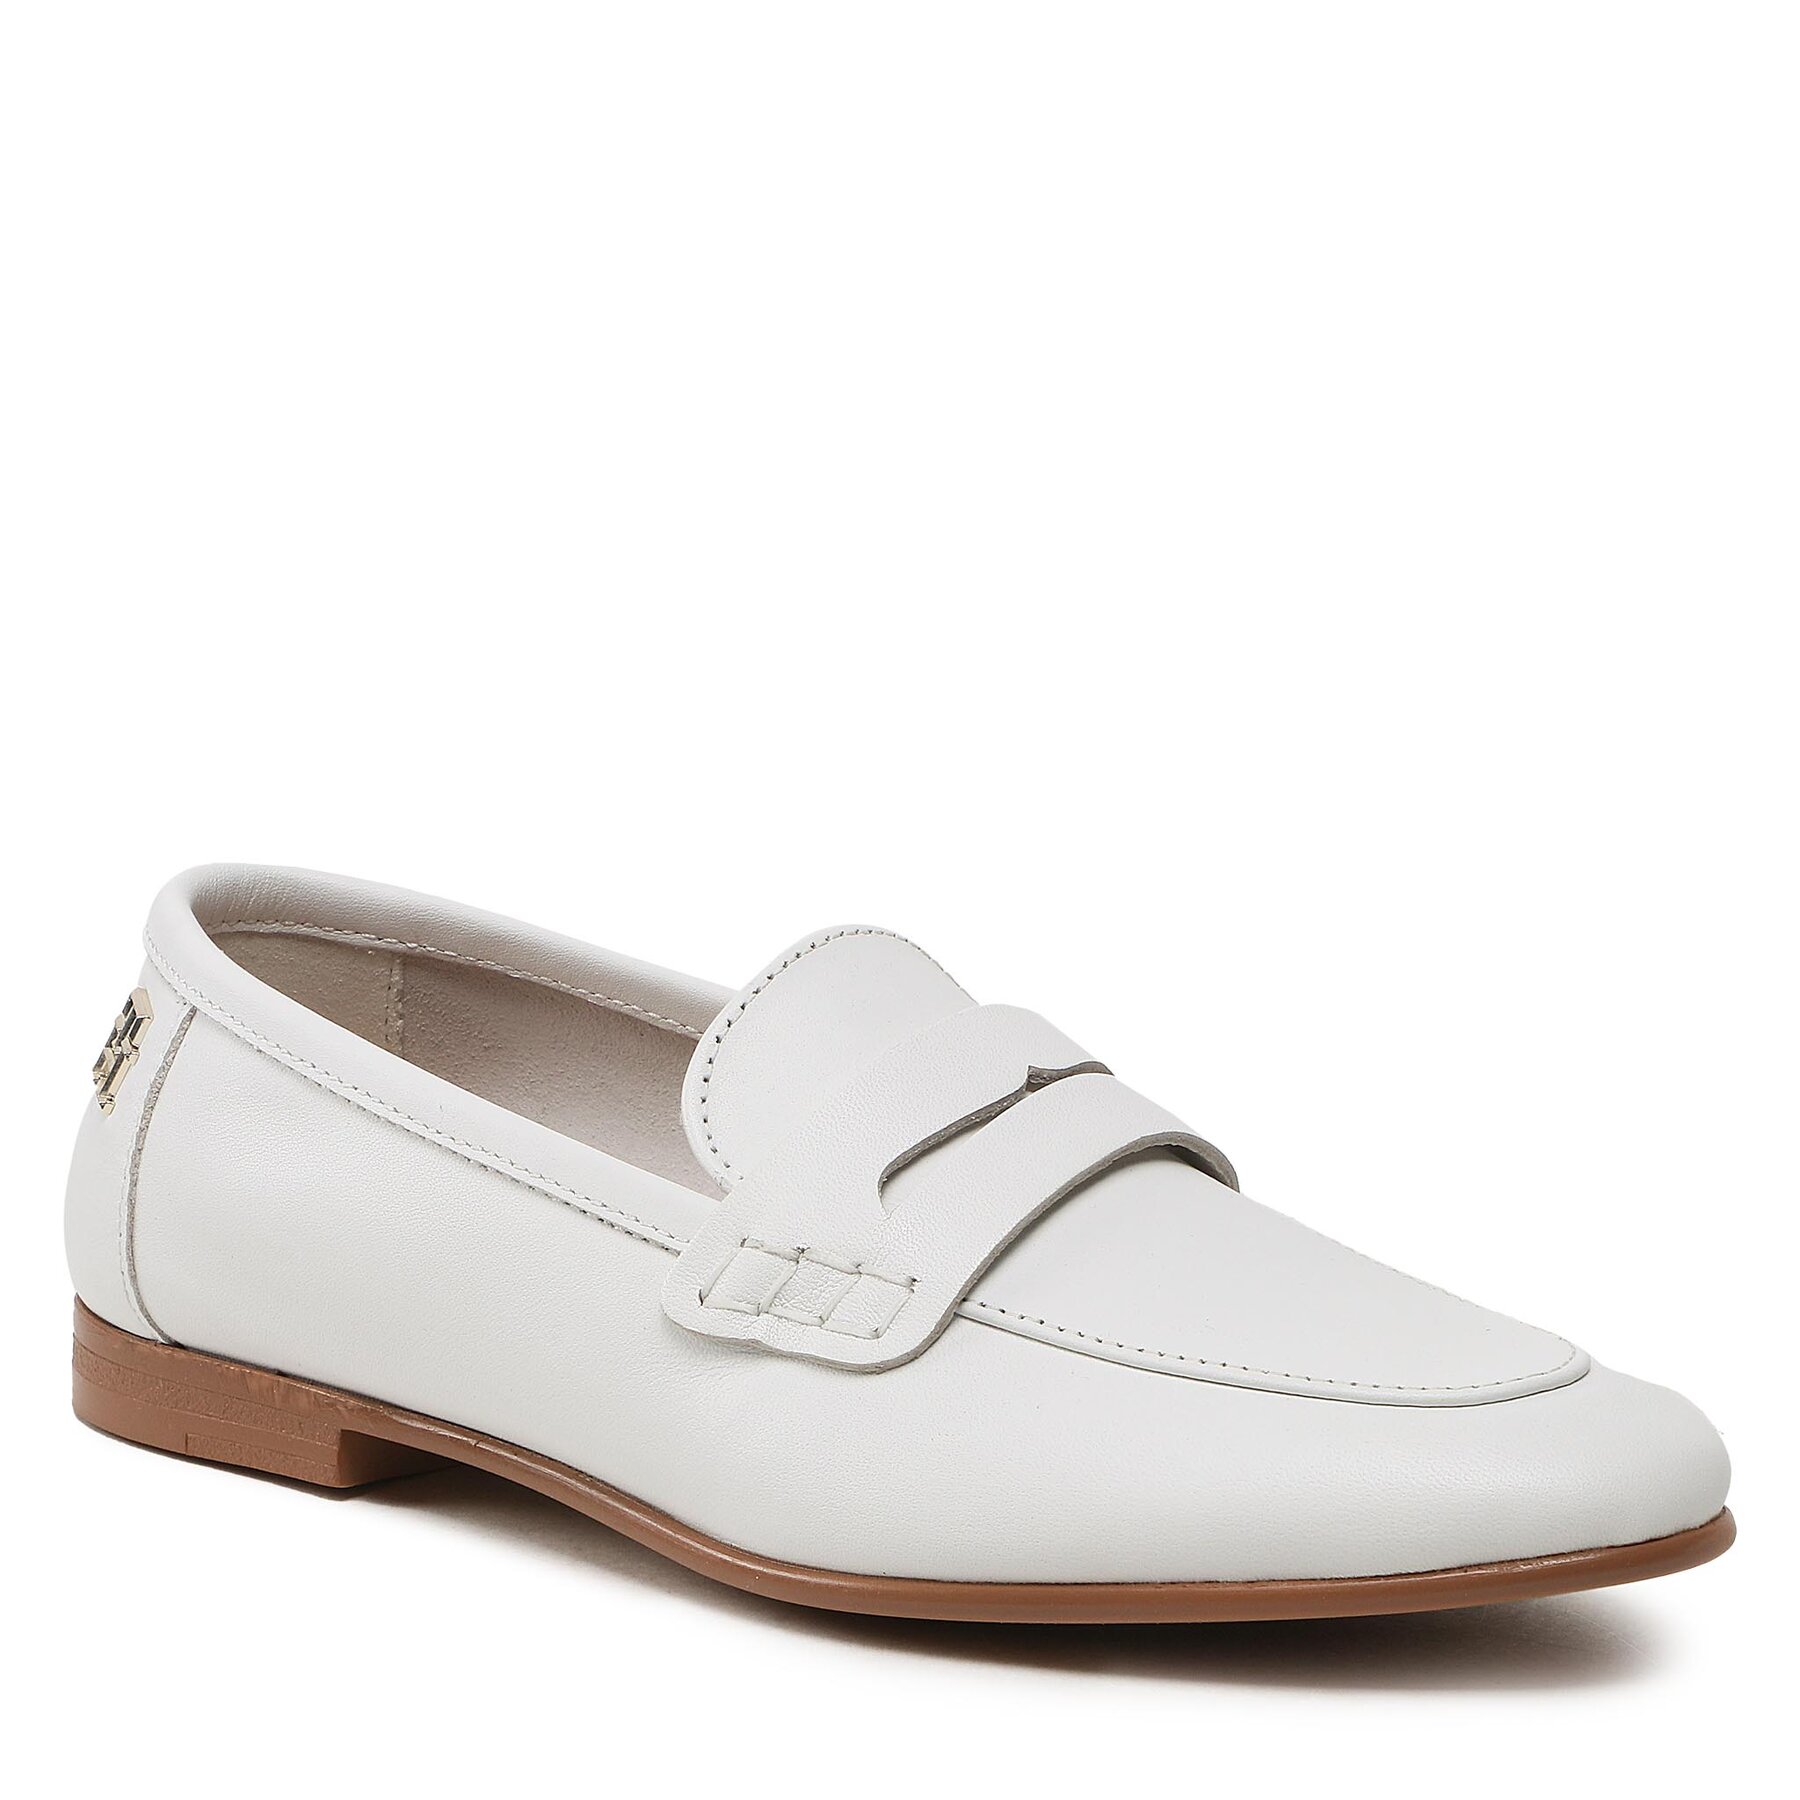 Lords Tommy Hilfiger Th Loafer FW0FW06991 White/Ecru 0LC 0LC imagine super redus 2022